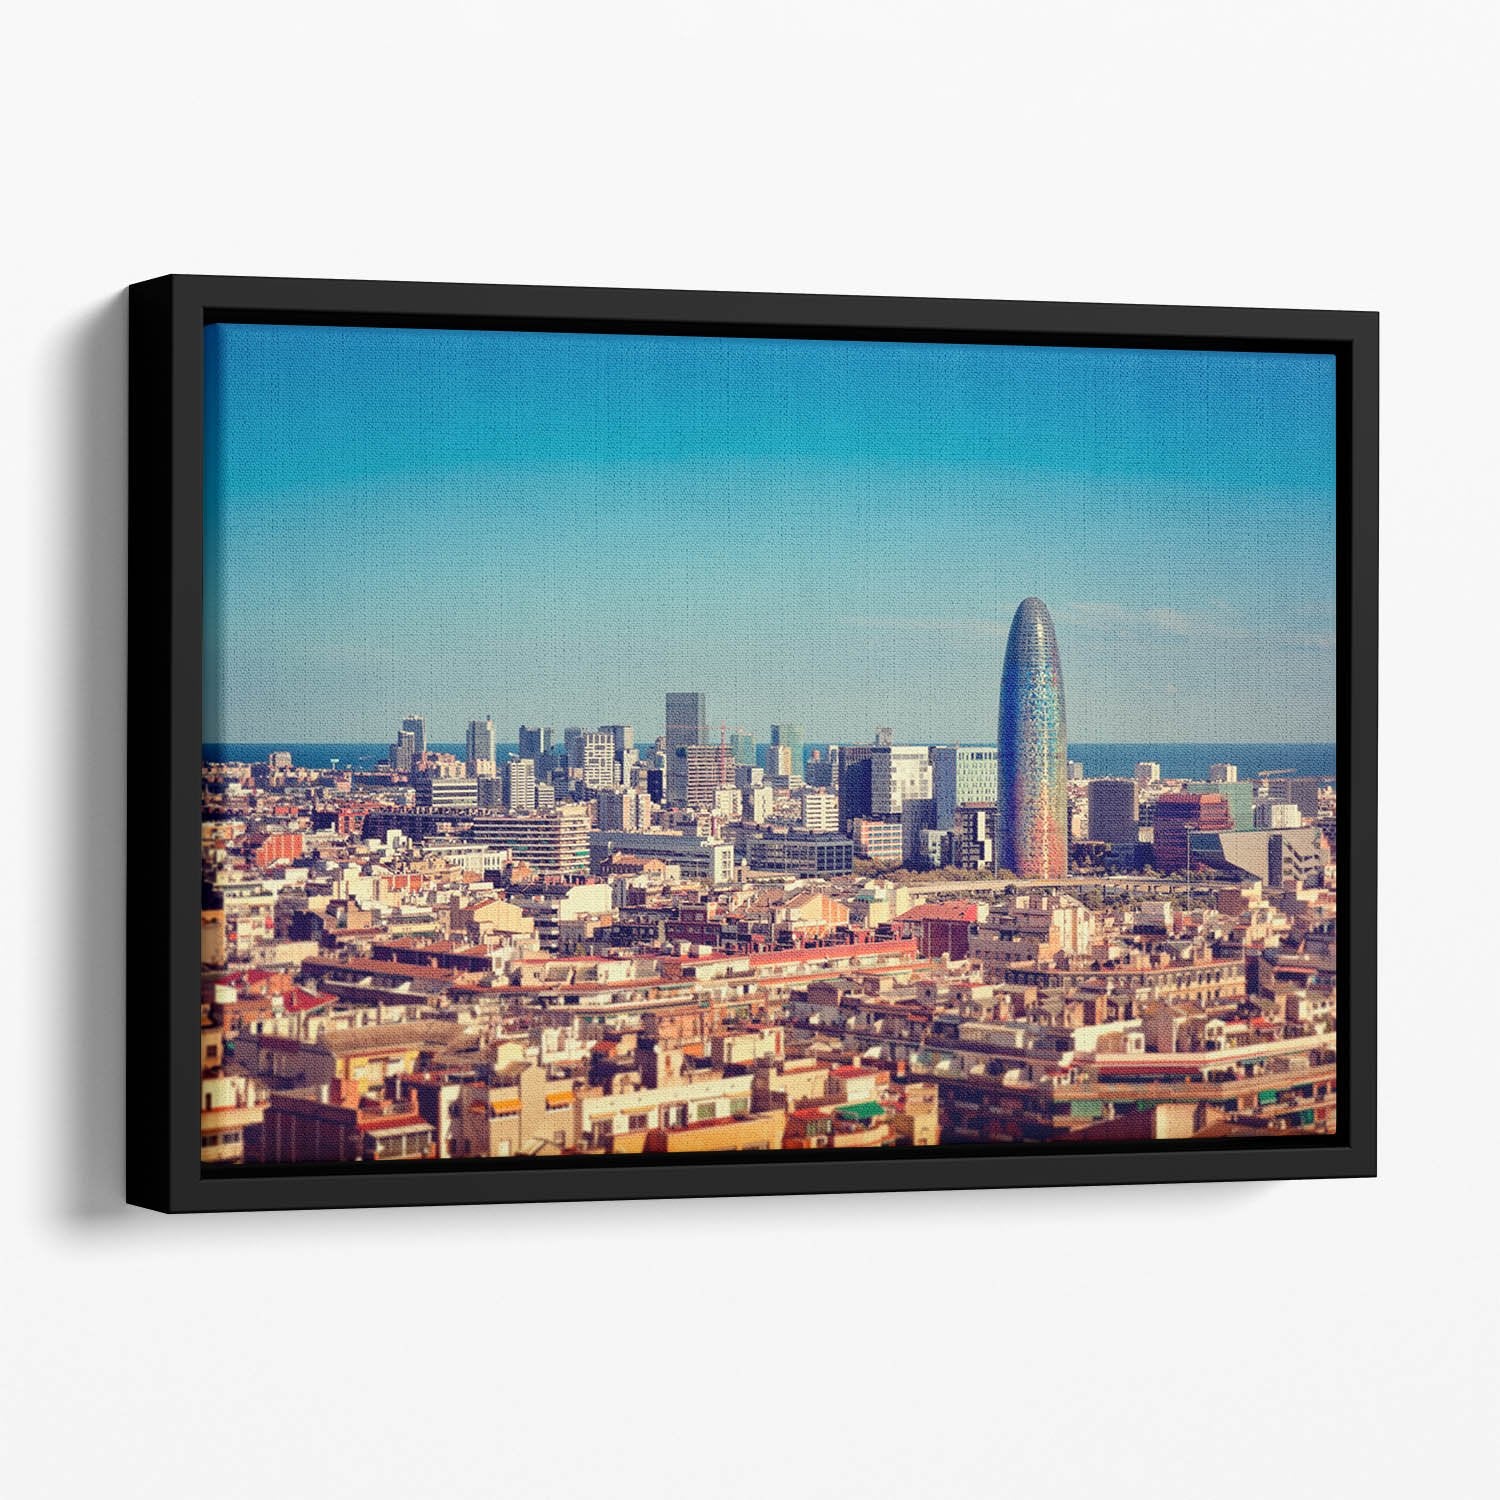 Barcelona skyline with skyscrapers Floating Framed Canvas